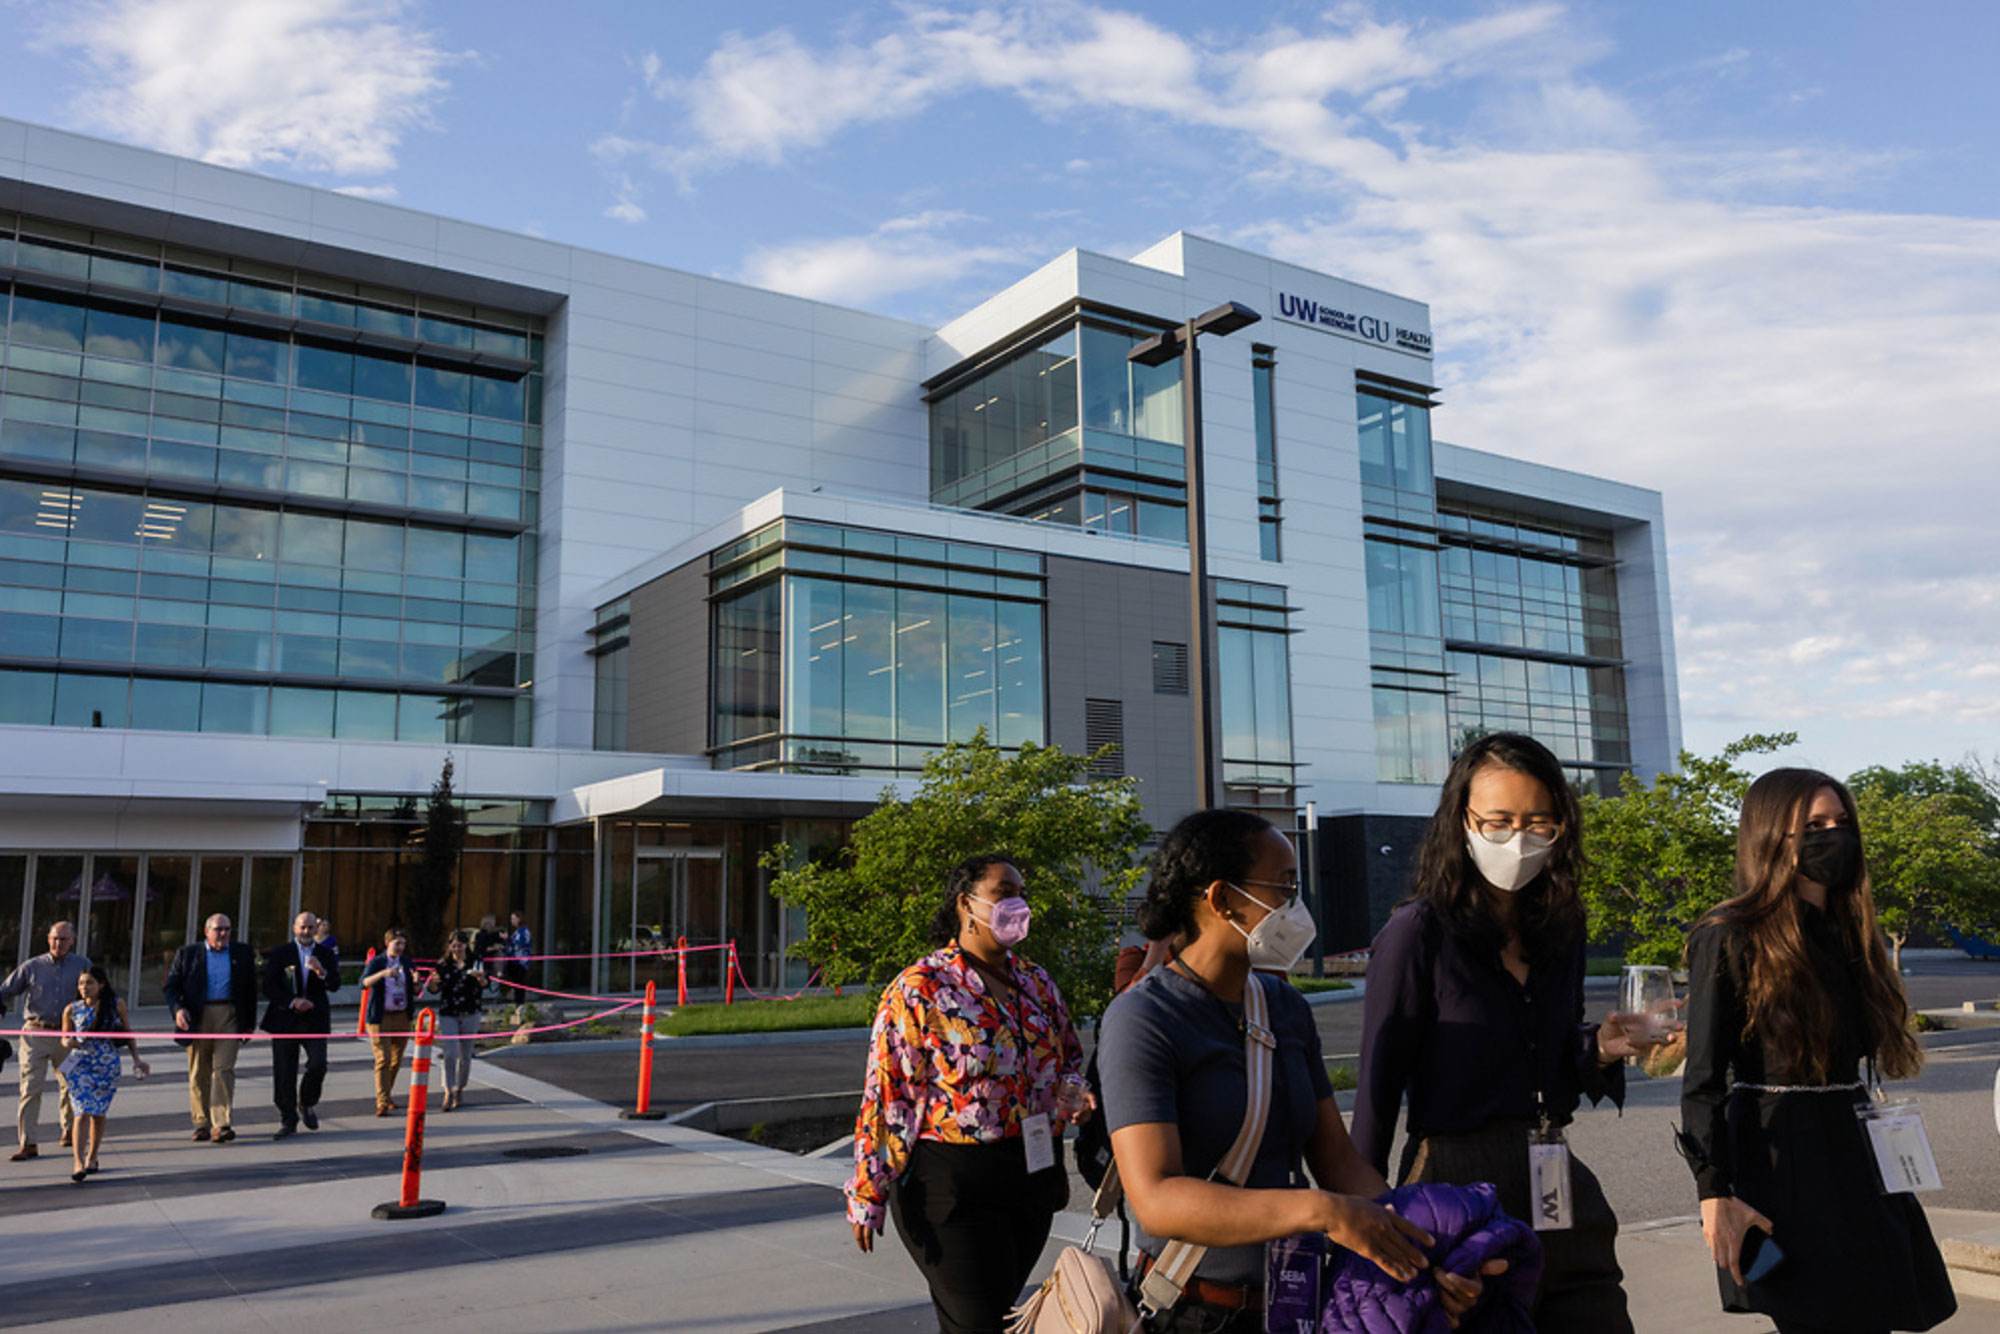 Students wearing masks walk outside a large new building on a sunny day